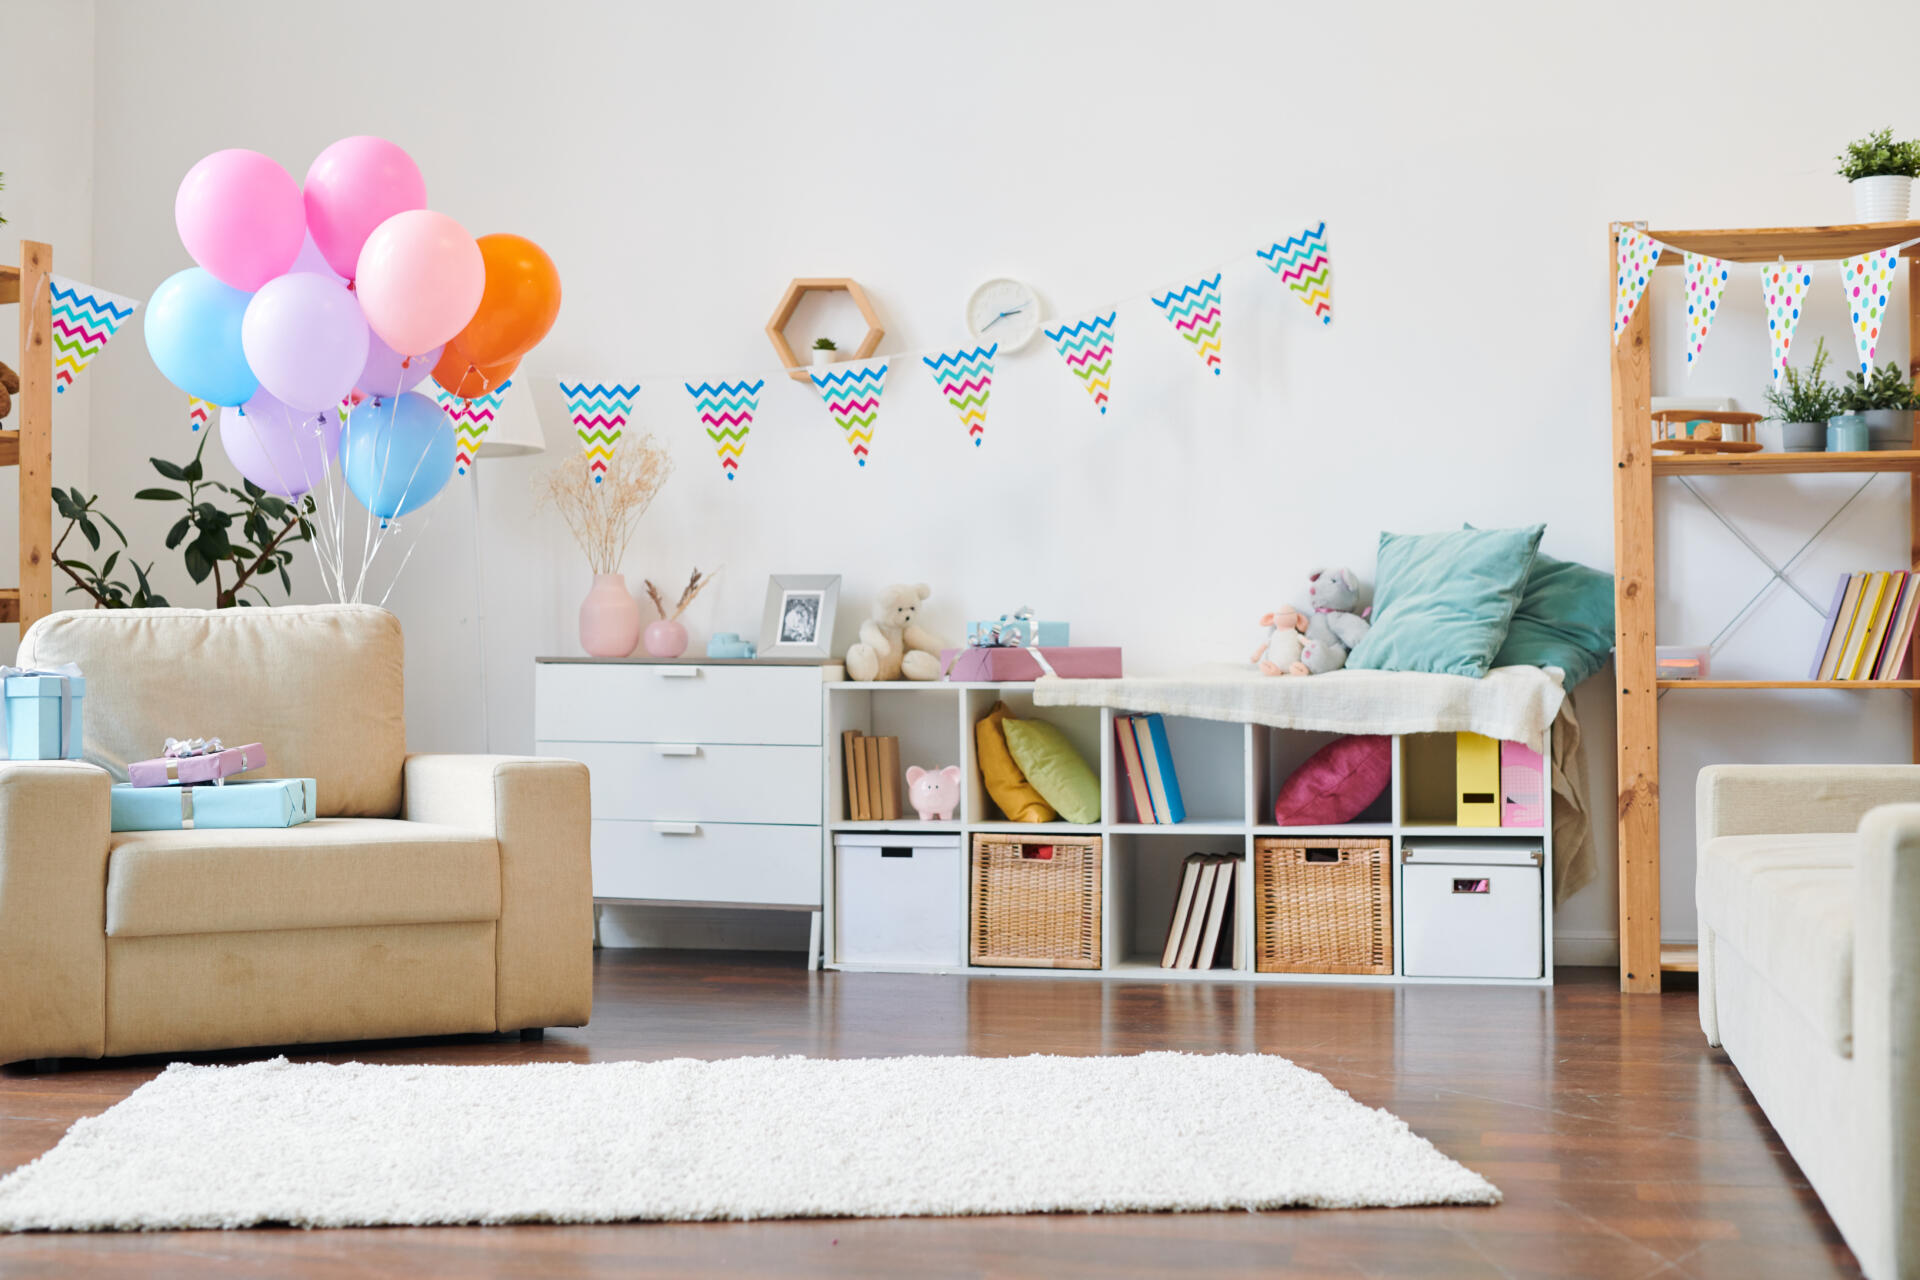 Bunch of colorful balloons and stack of giftboxes on armchair in the living-room decorated with flags for home birthday party